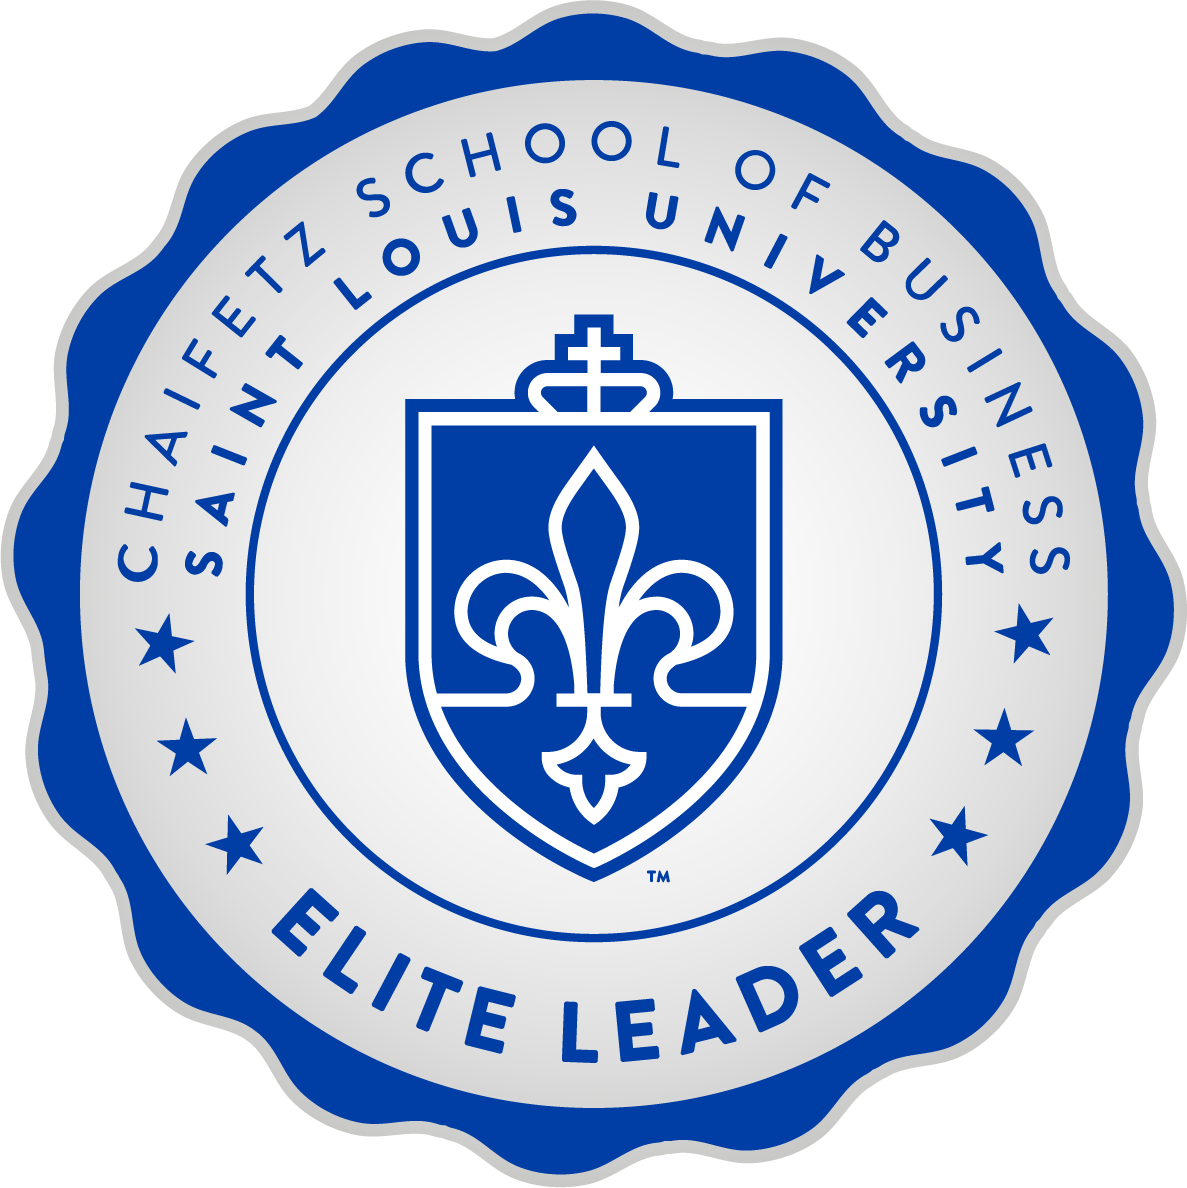 A sample digital badge consisting of a circle with the SLU seal and the text Saint Louis University Chaifetz School of Business Elite Leader"